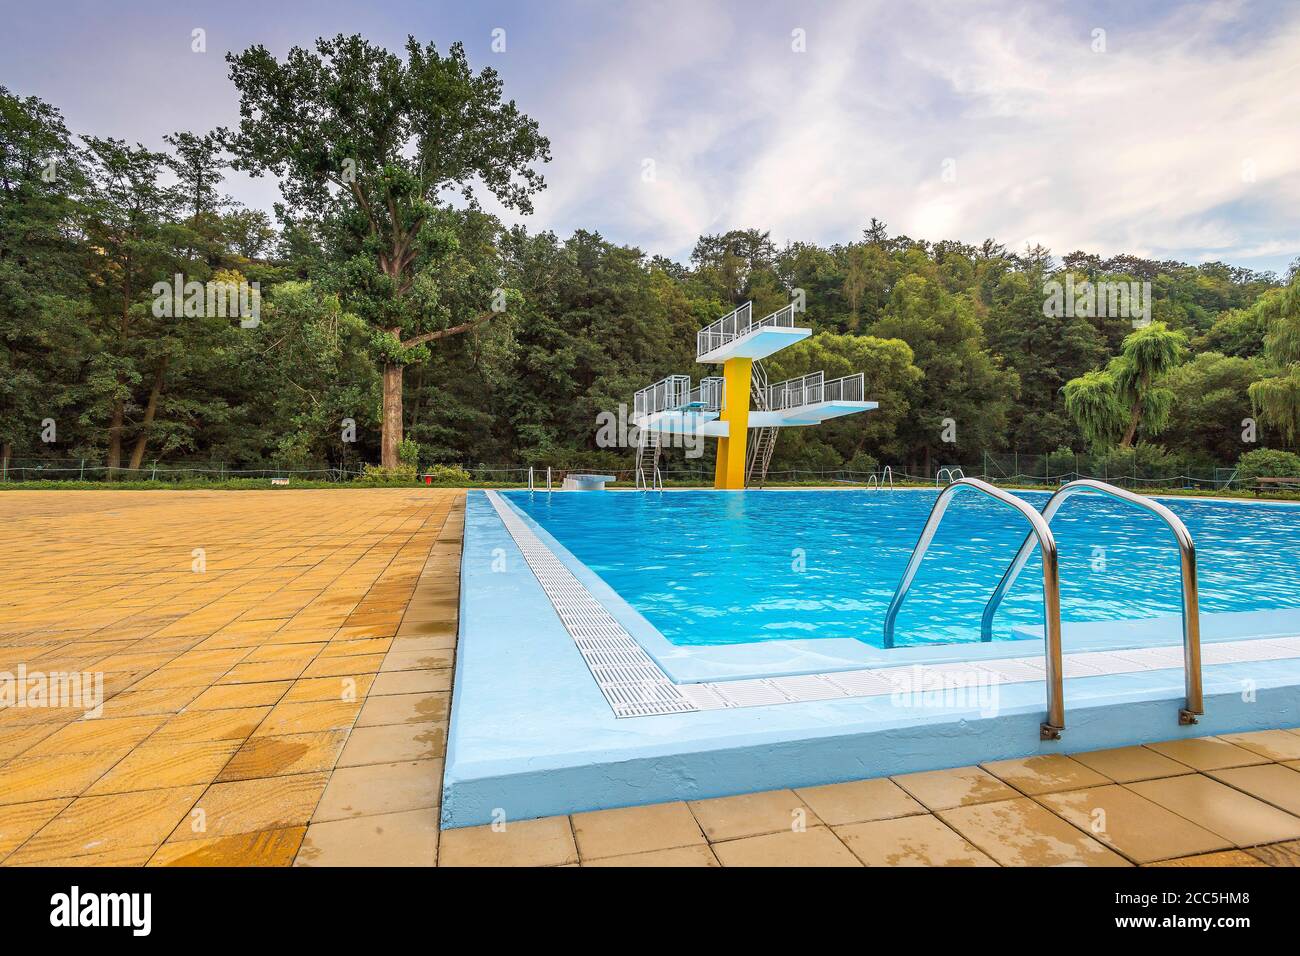 vacant outdoor swimming pool with diving tower Stock Photo